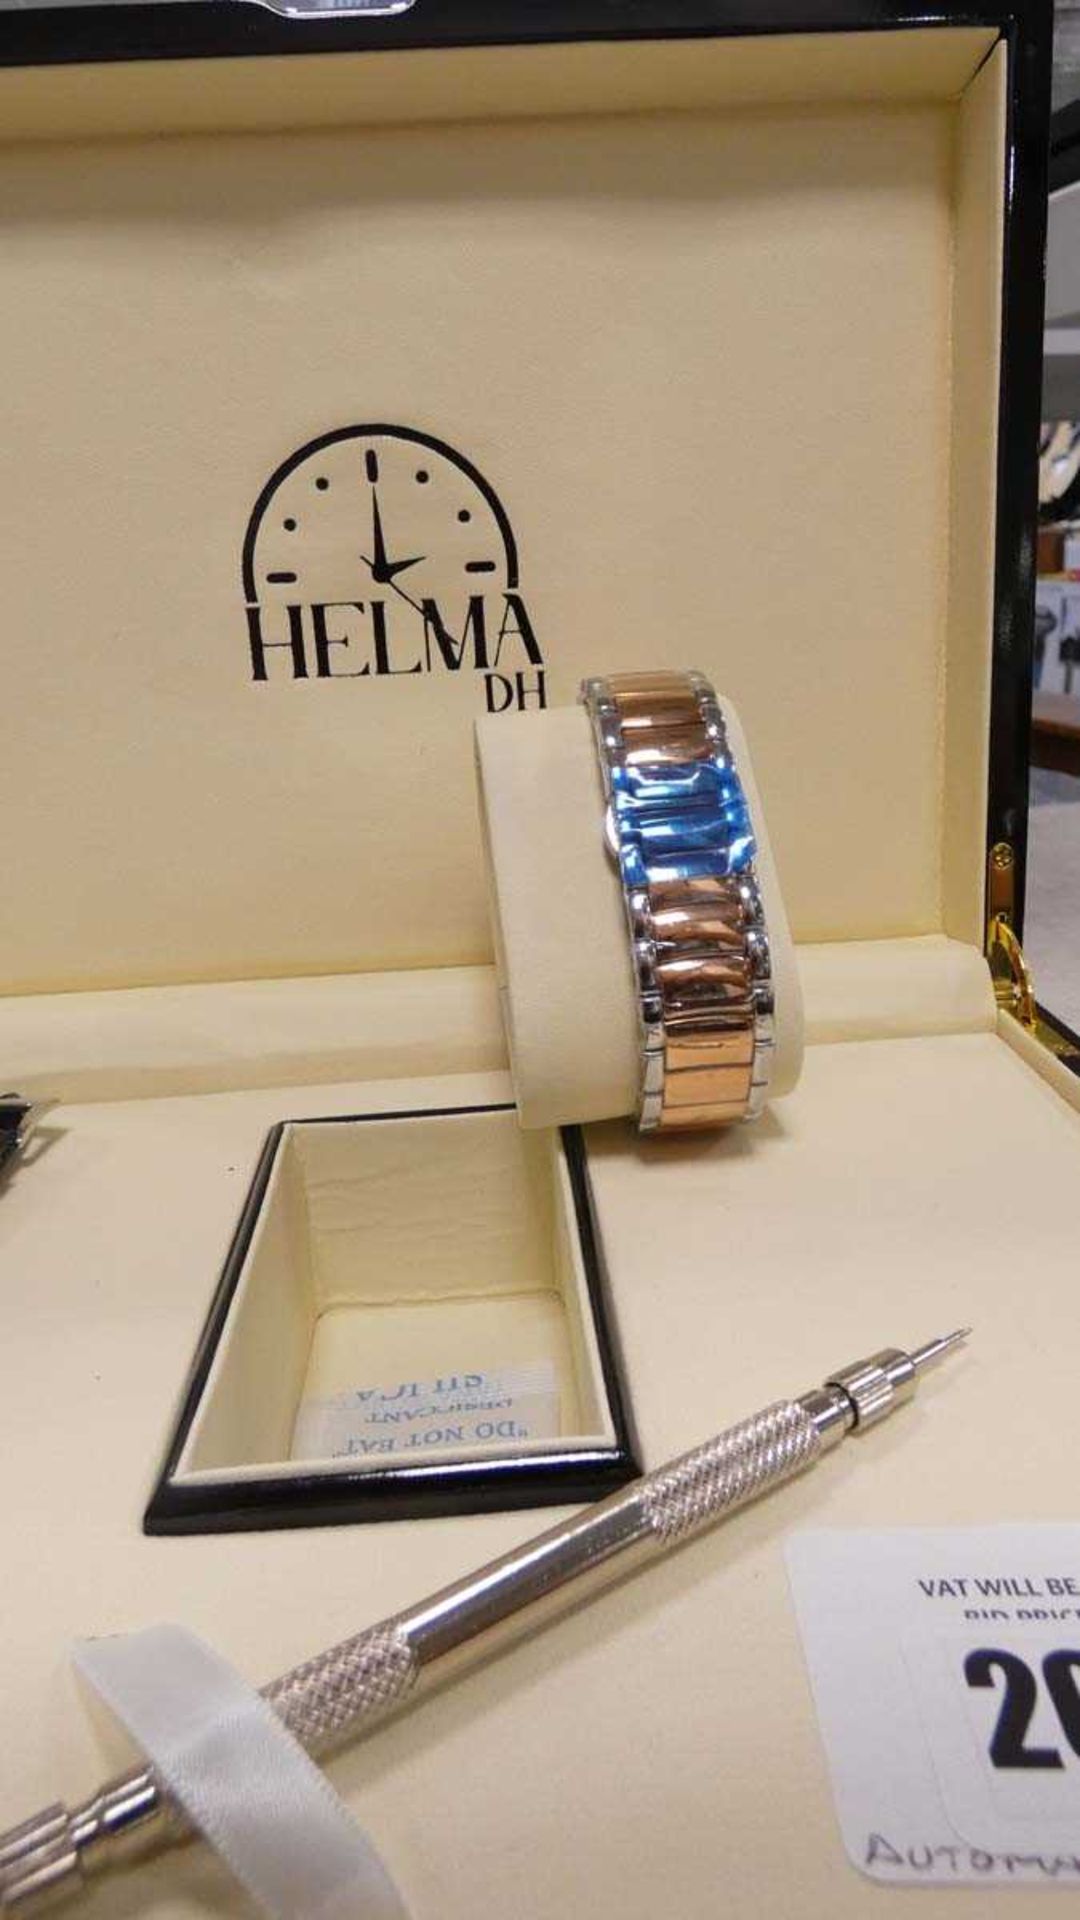 +VAT World View automatic movement watch by Helma with presentation case and replacement strap - Image 4 of 4